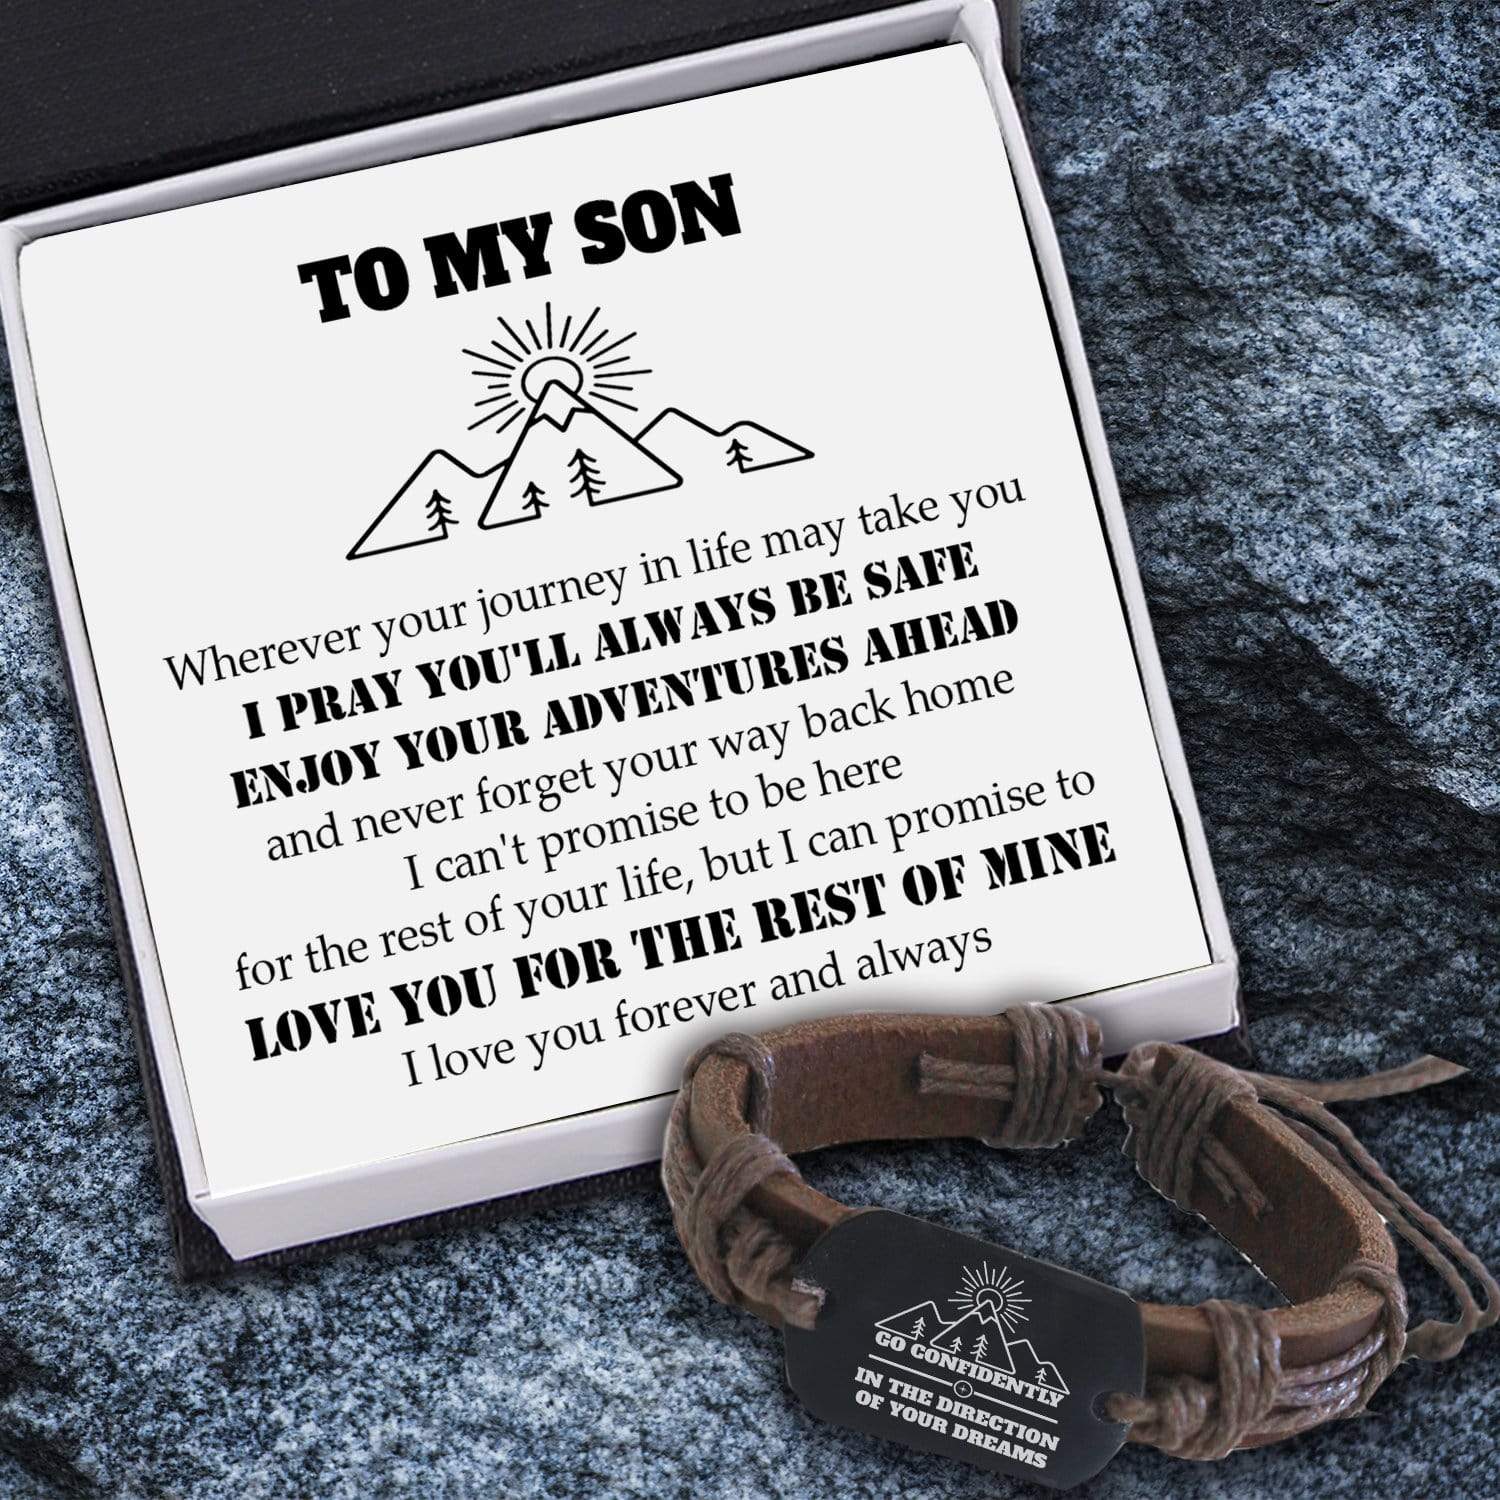 Leather Cord Bracelet - Travel - To My Son - Love You For The Rest Of Mine - Gbr16002